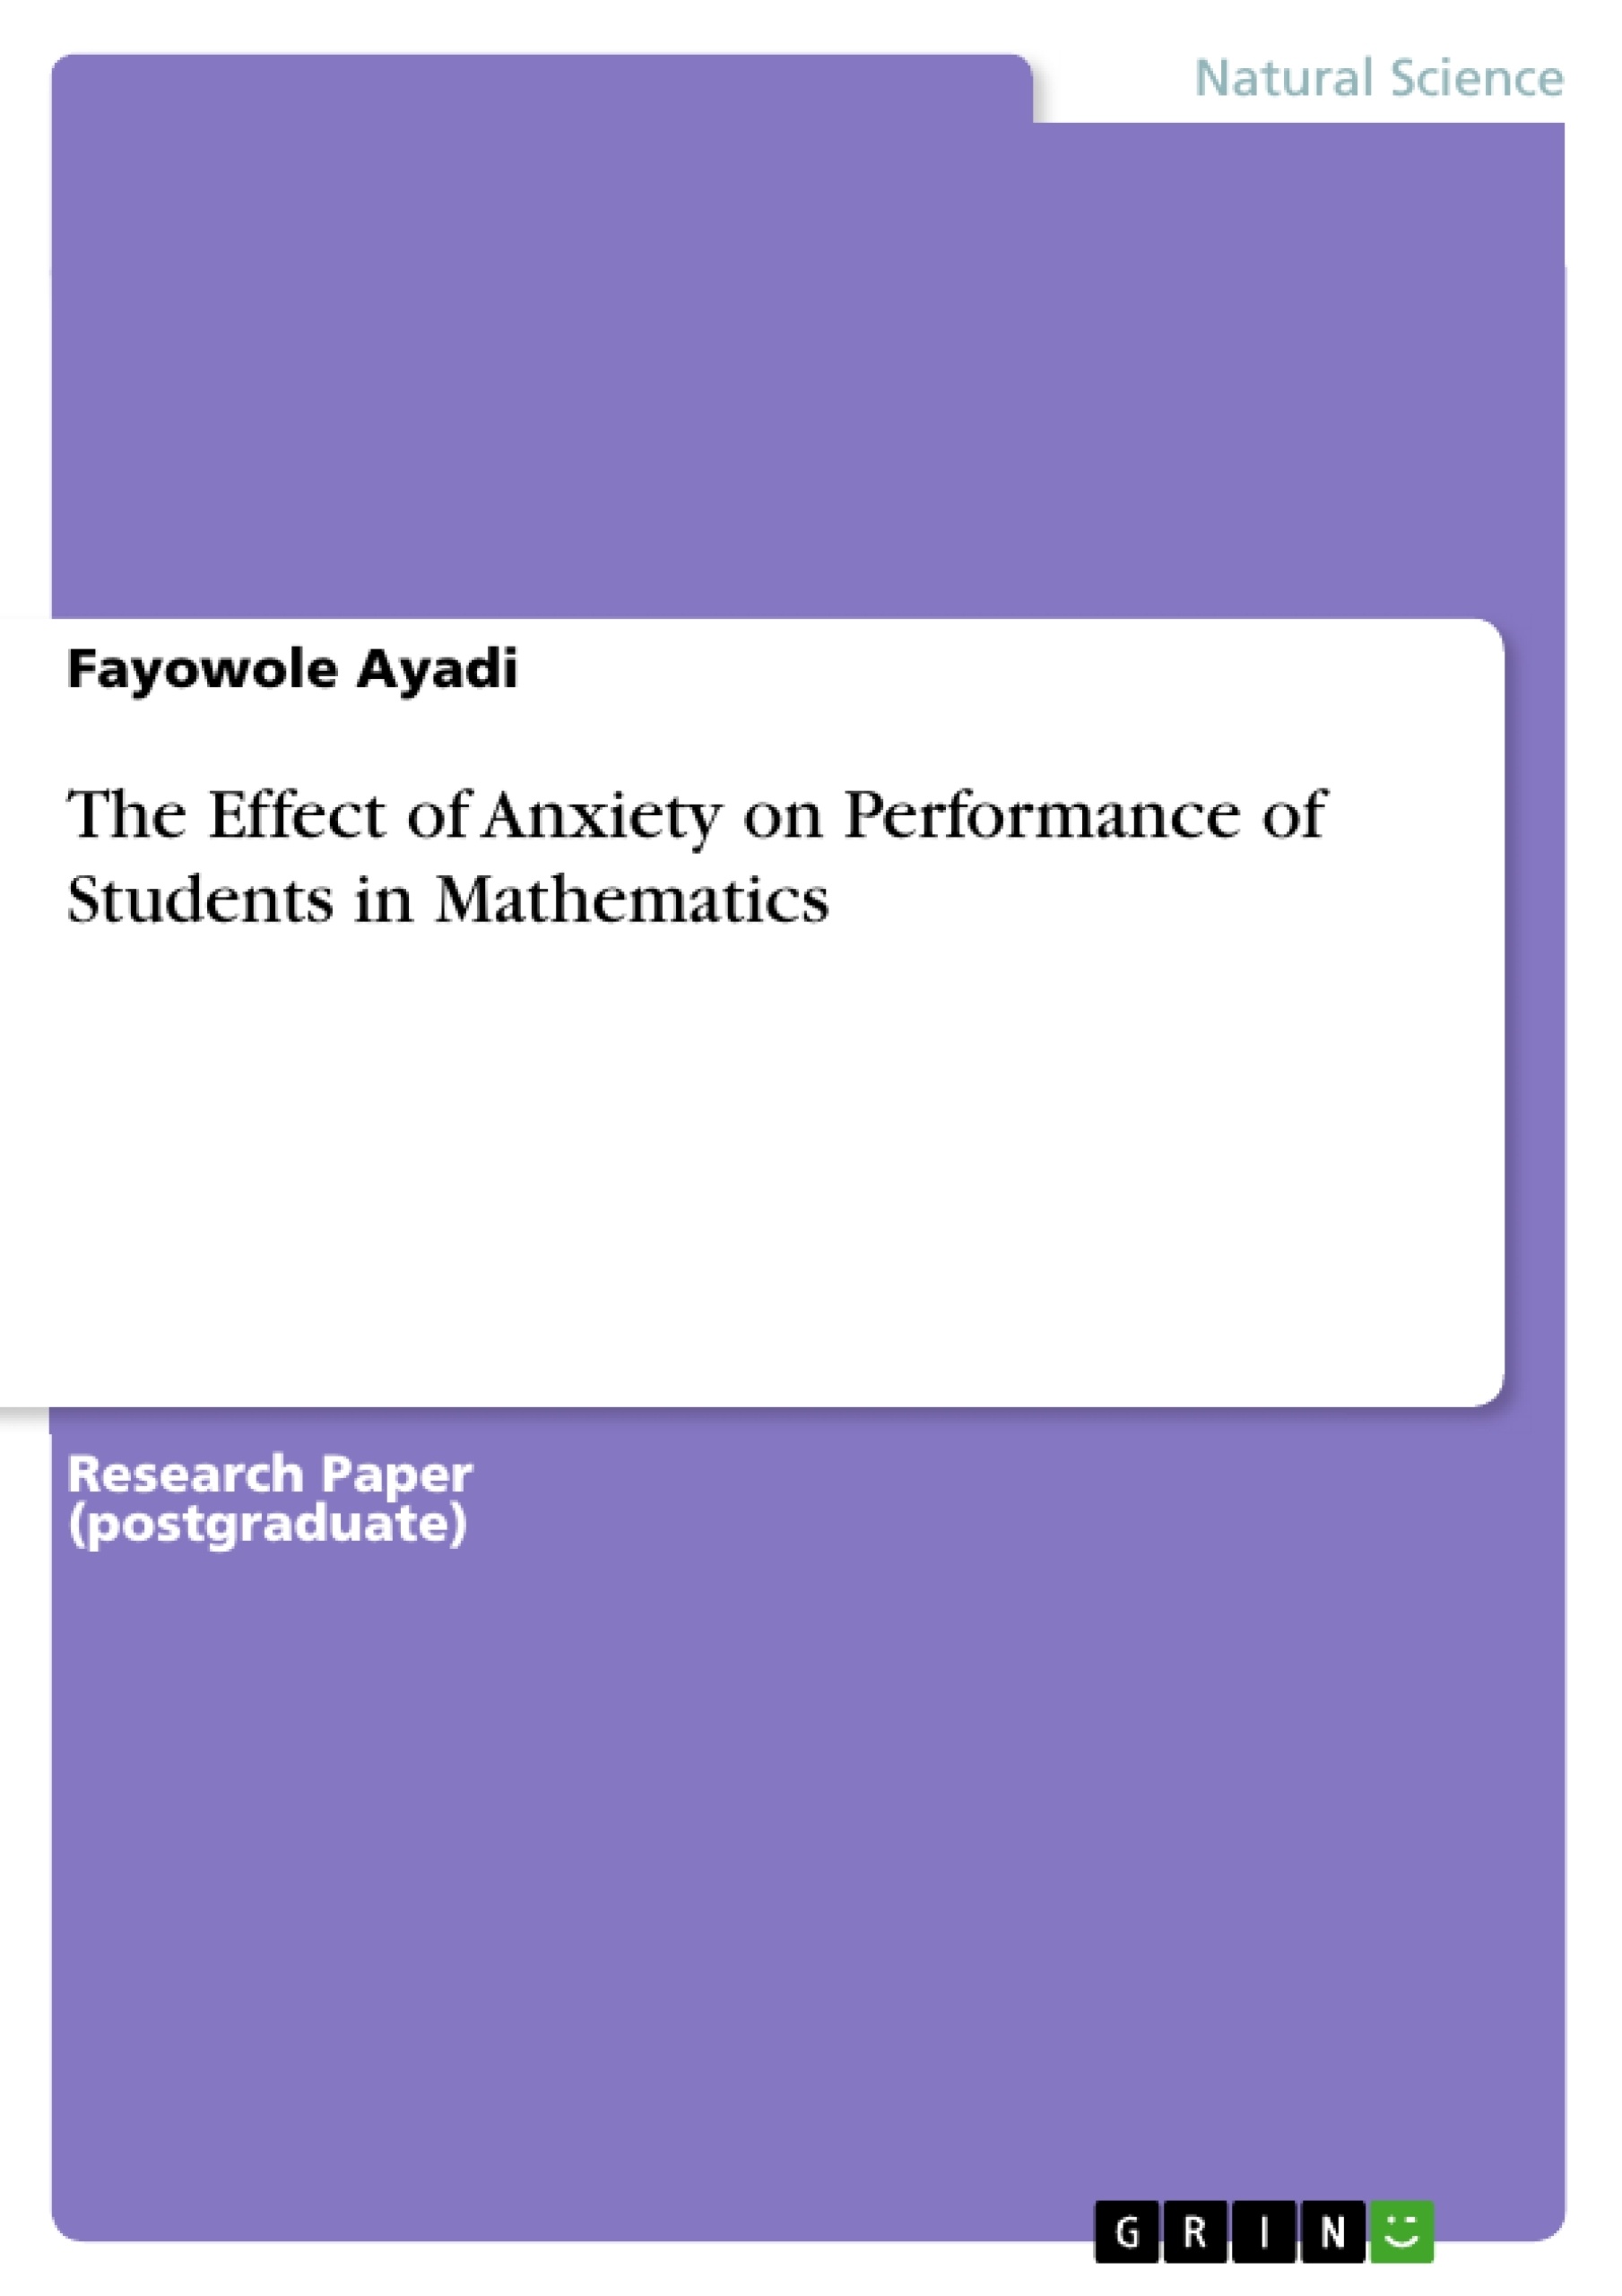 Título: The Effect of Anxiety on Performance of Students in Mathematics